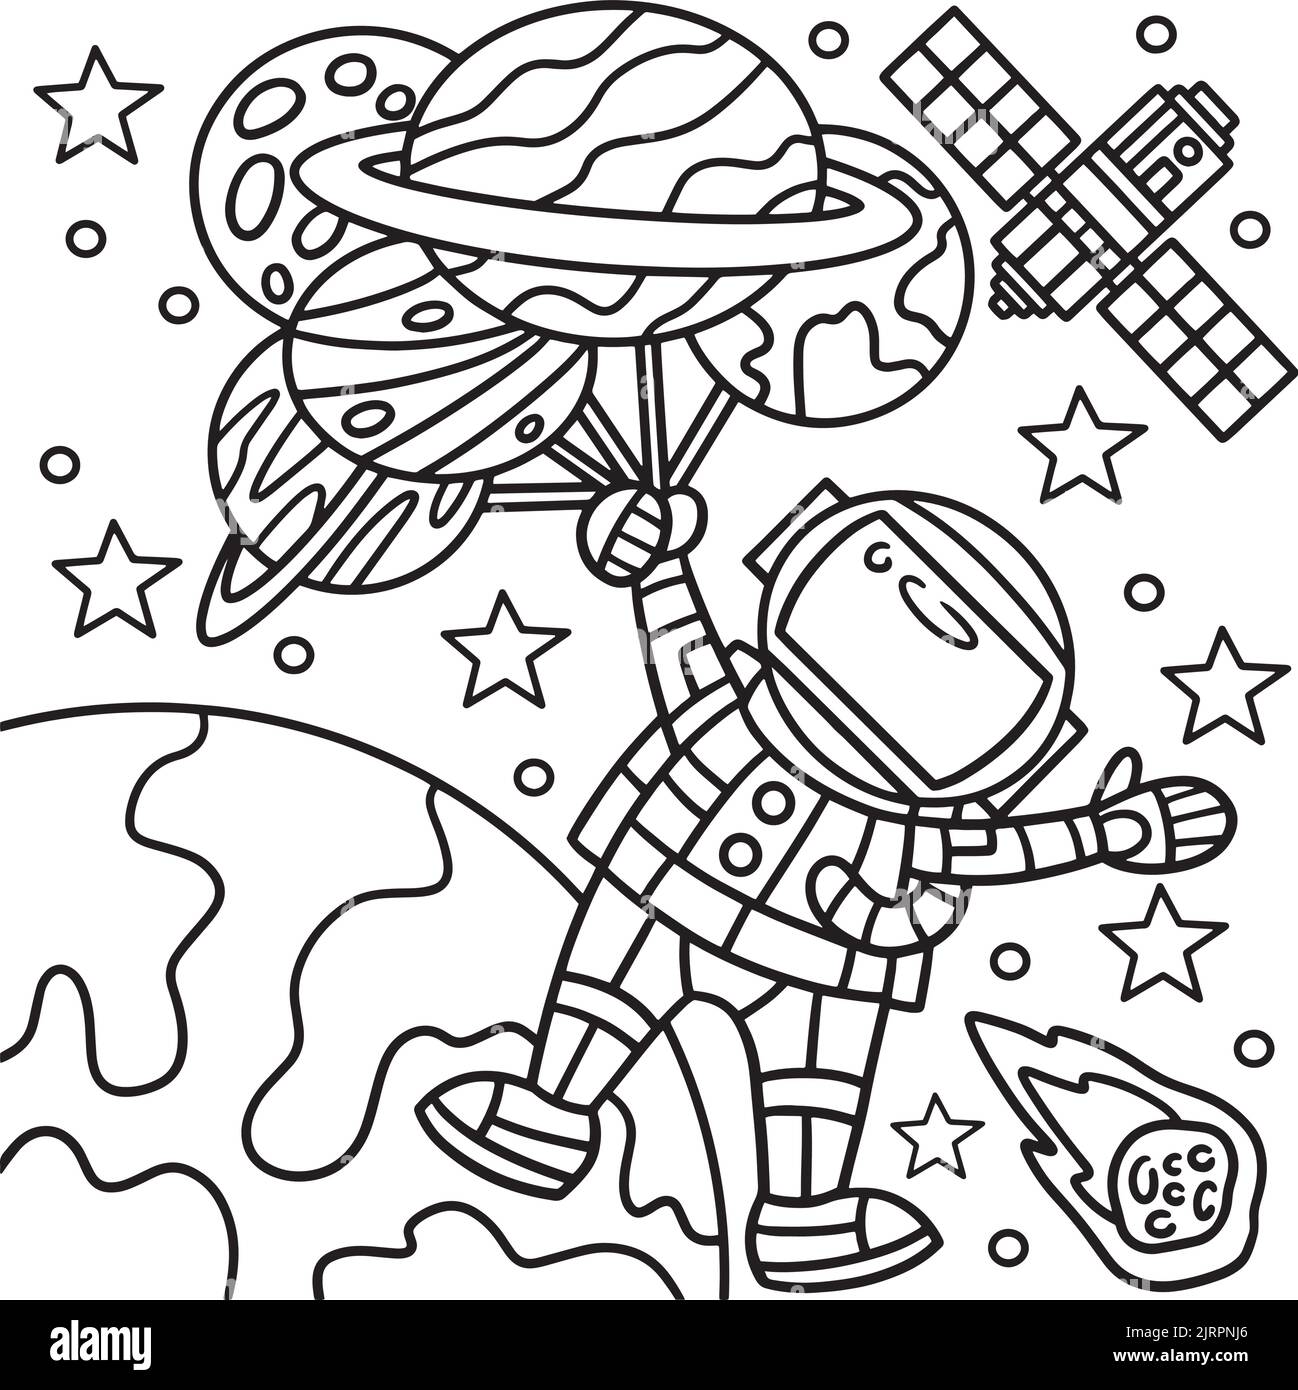 Astronaut Holding Balloon Planet Coloring Page  Stock Vector